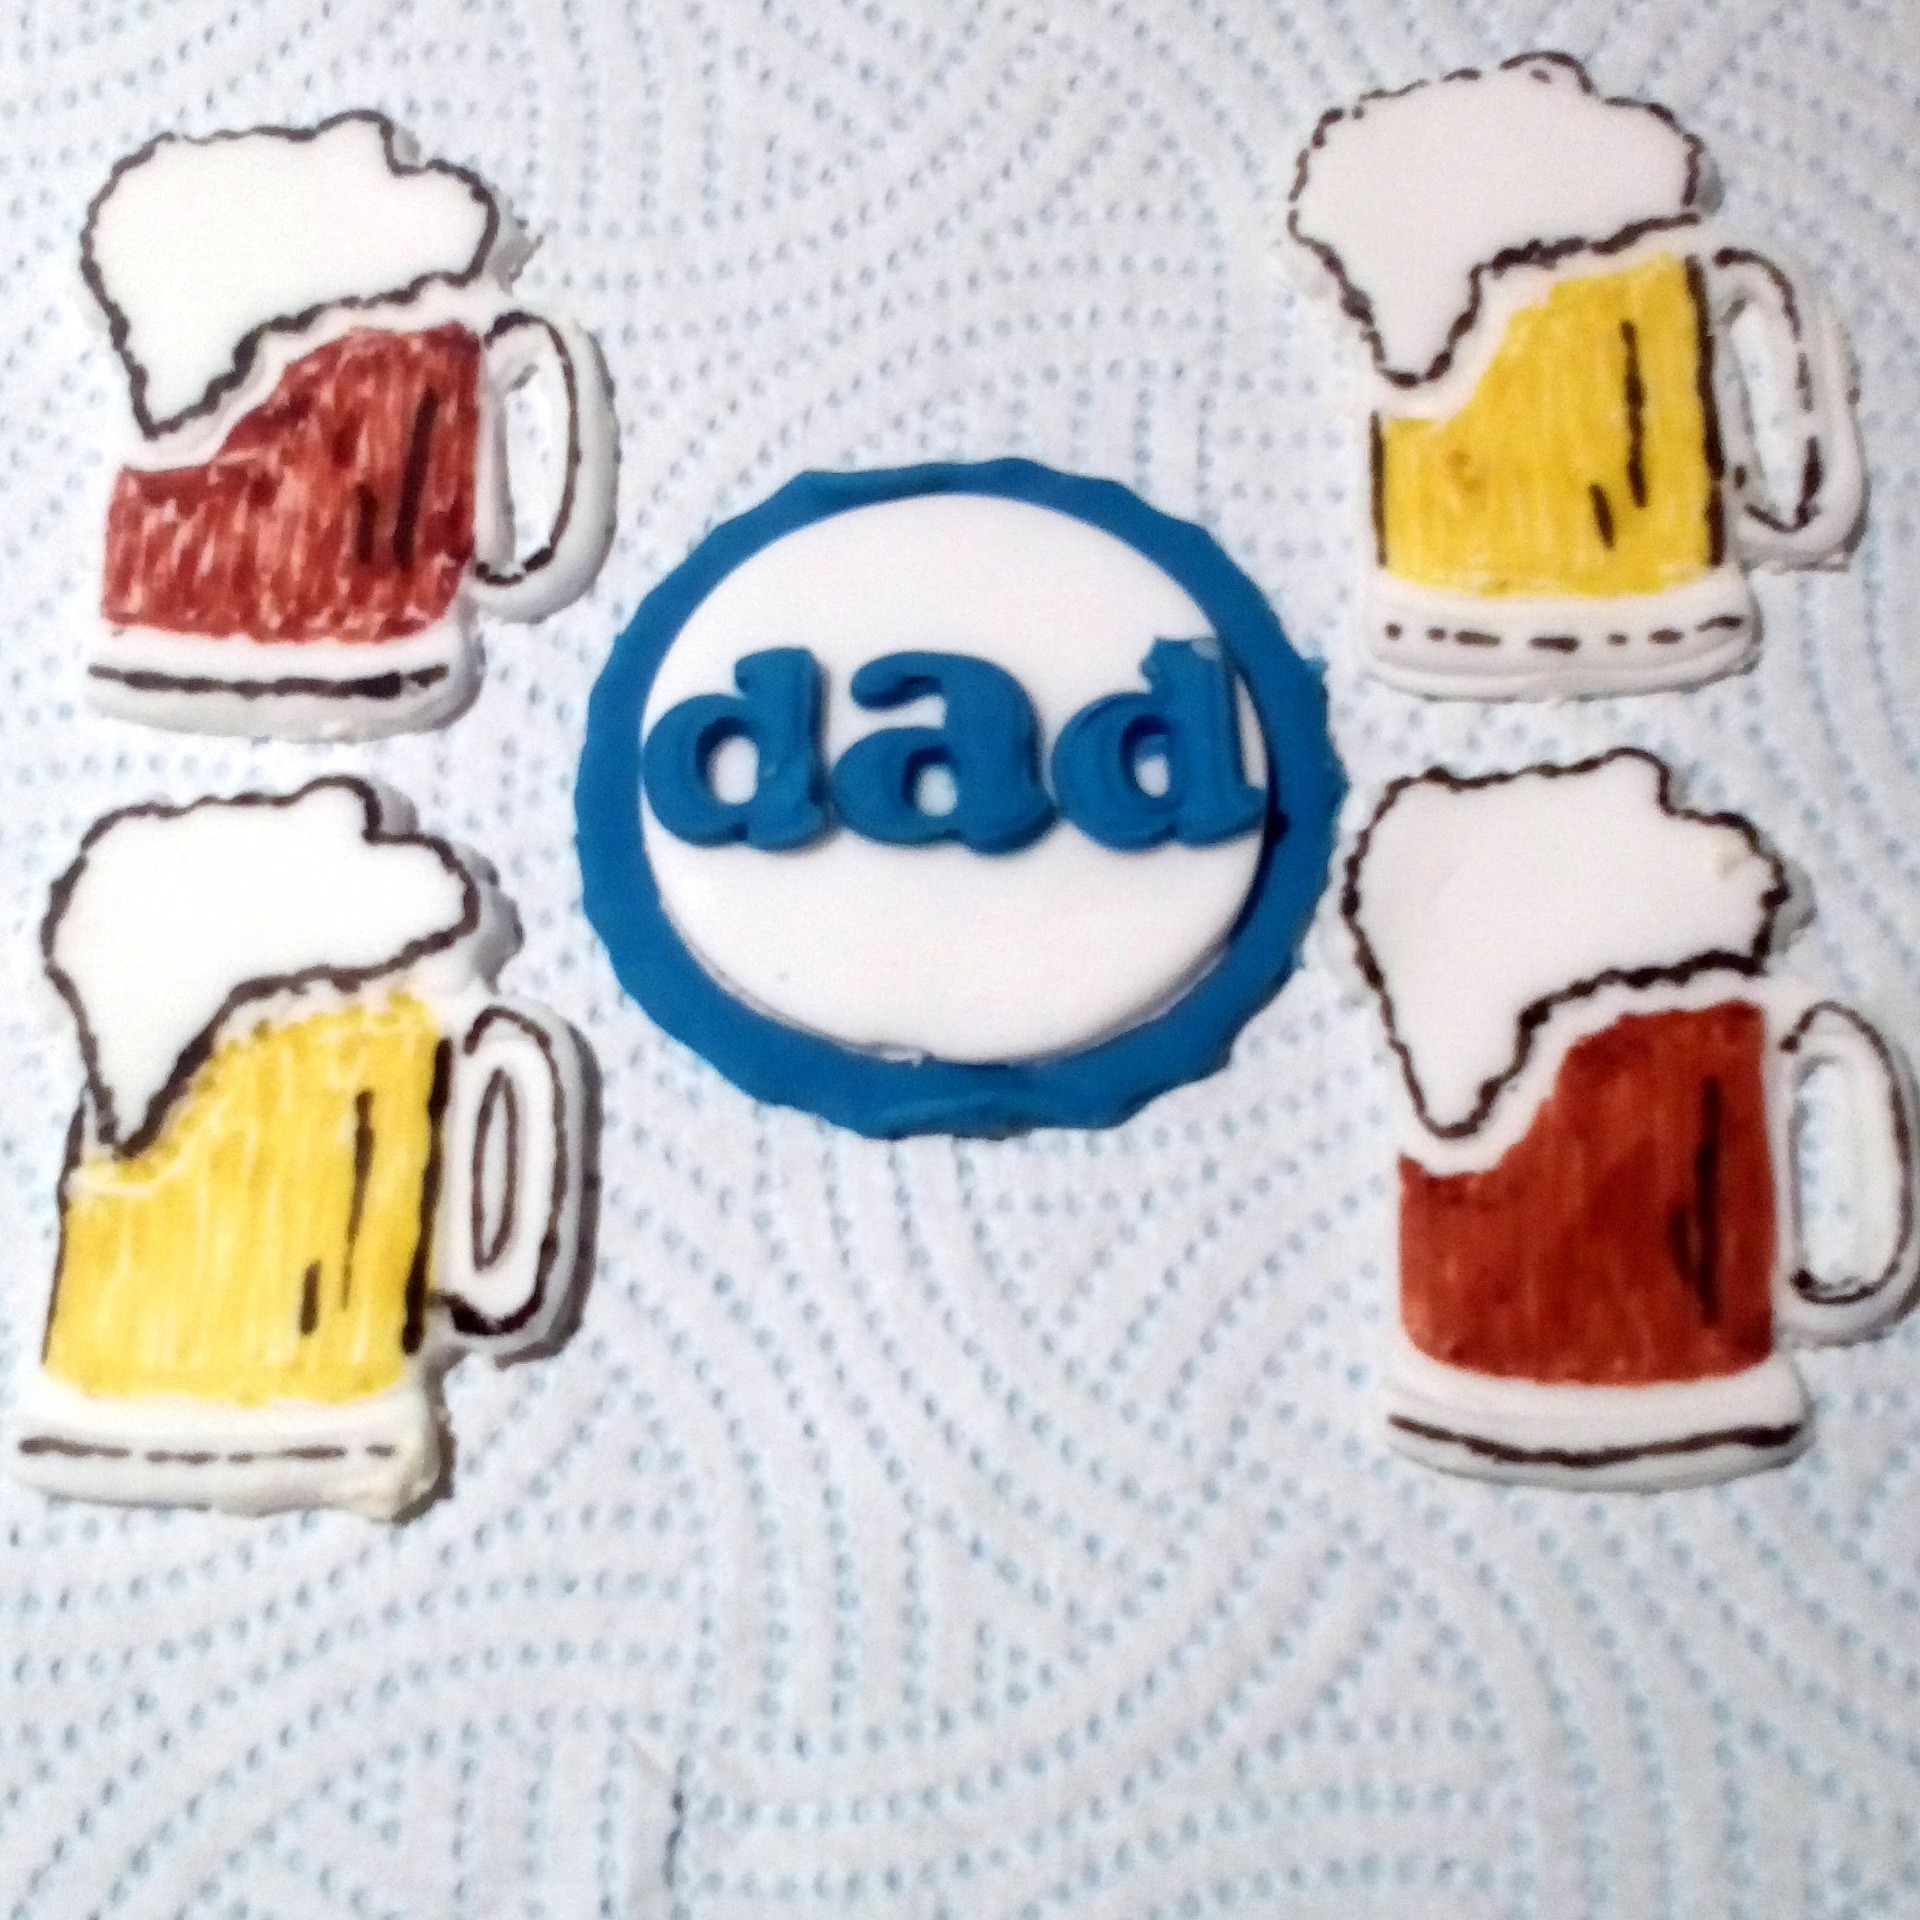 Beer jug fathers day cake toppers